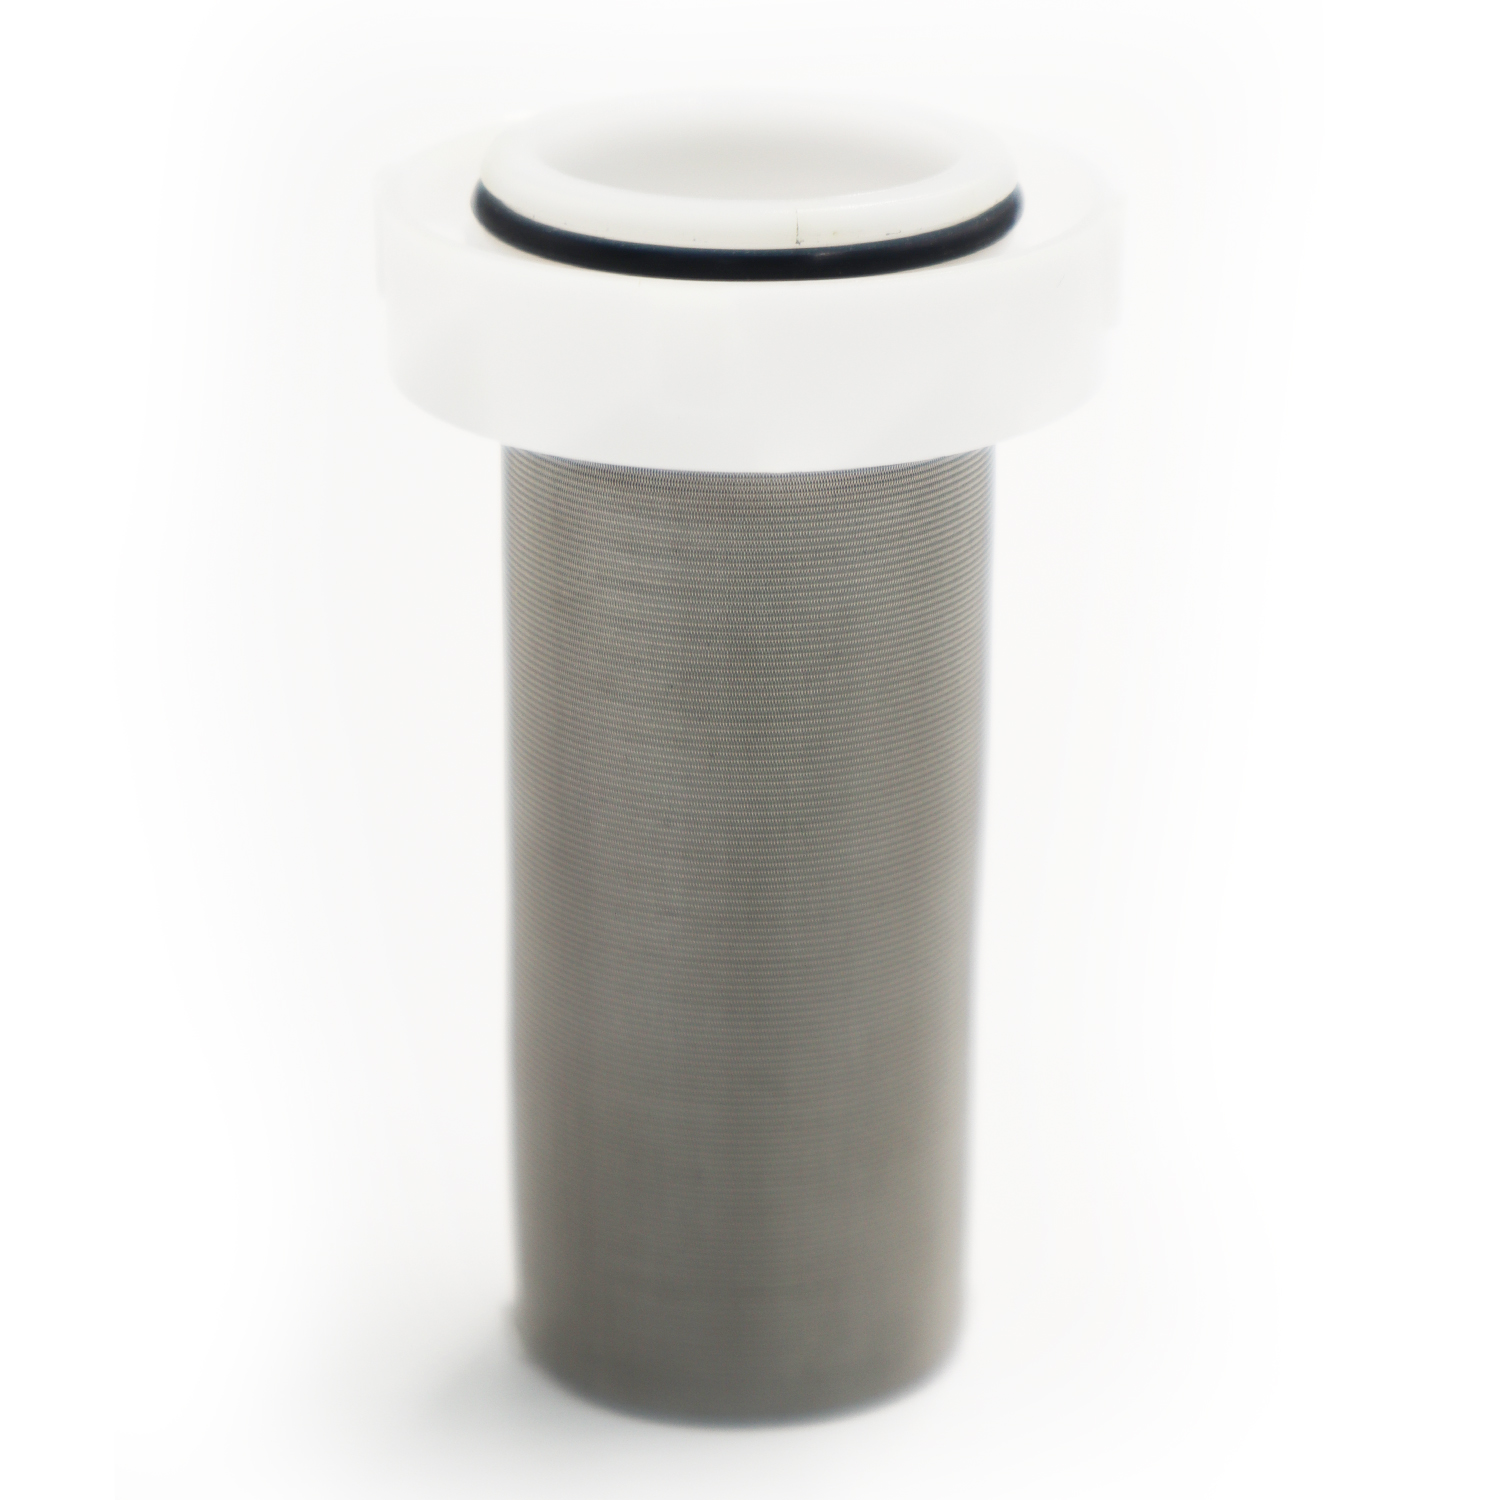 Replacement Filter for Q800 Water Filter System,Vortopt